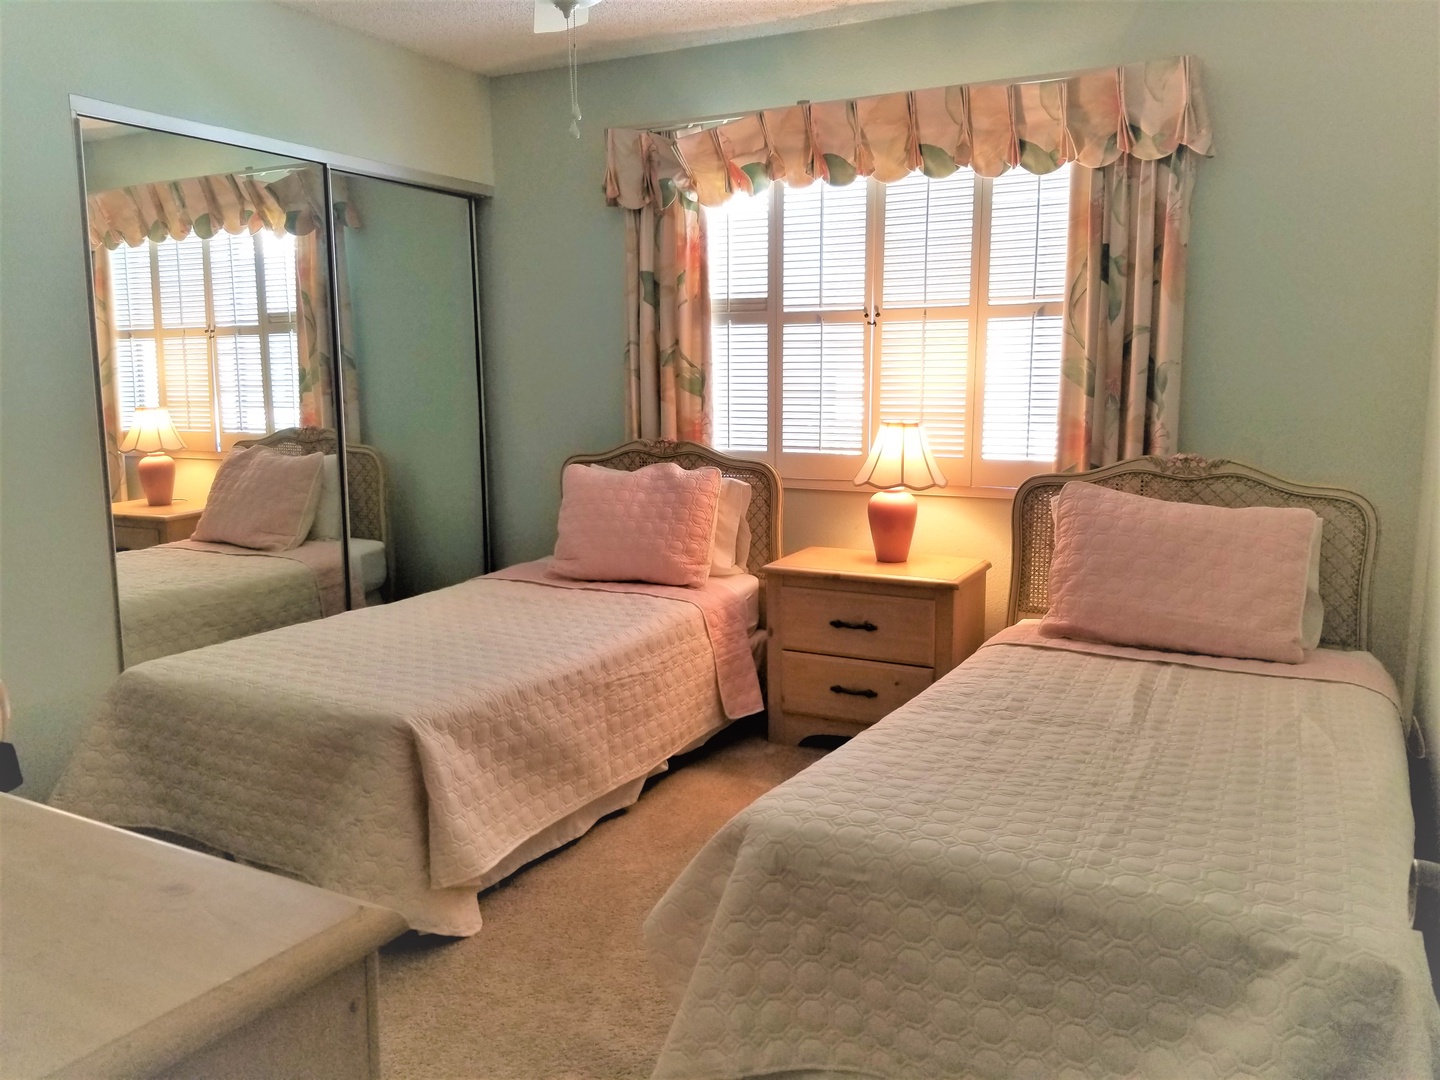 Guest Bedroom with Two Twins